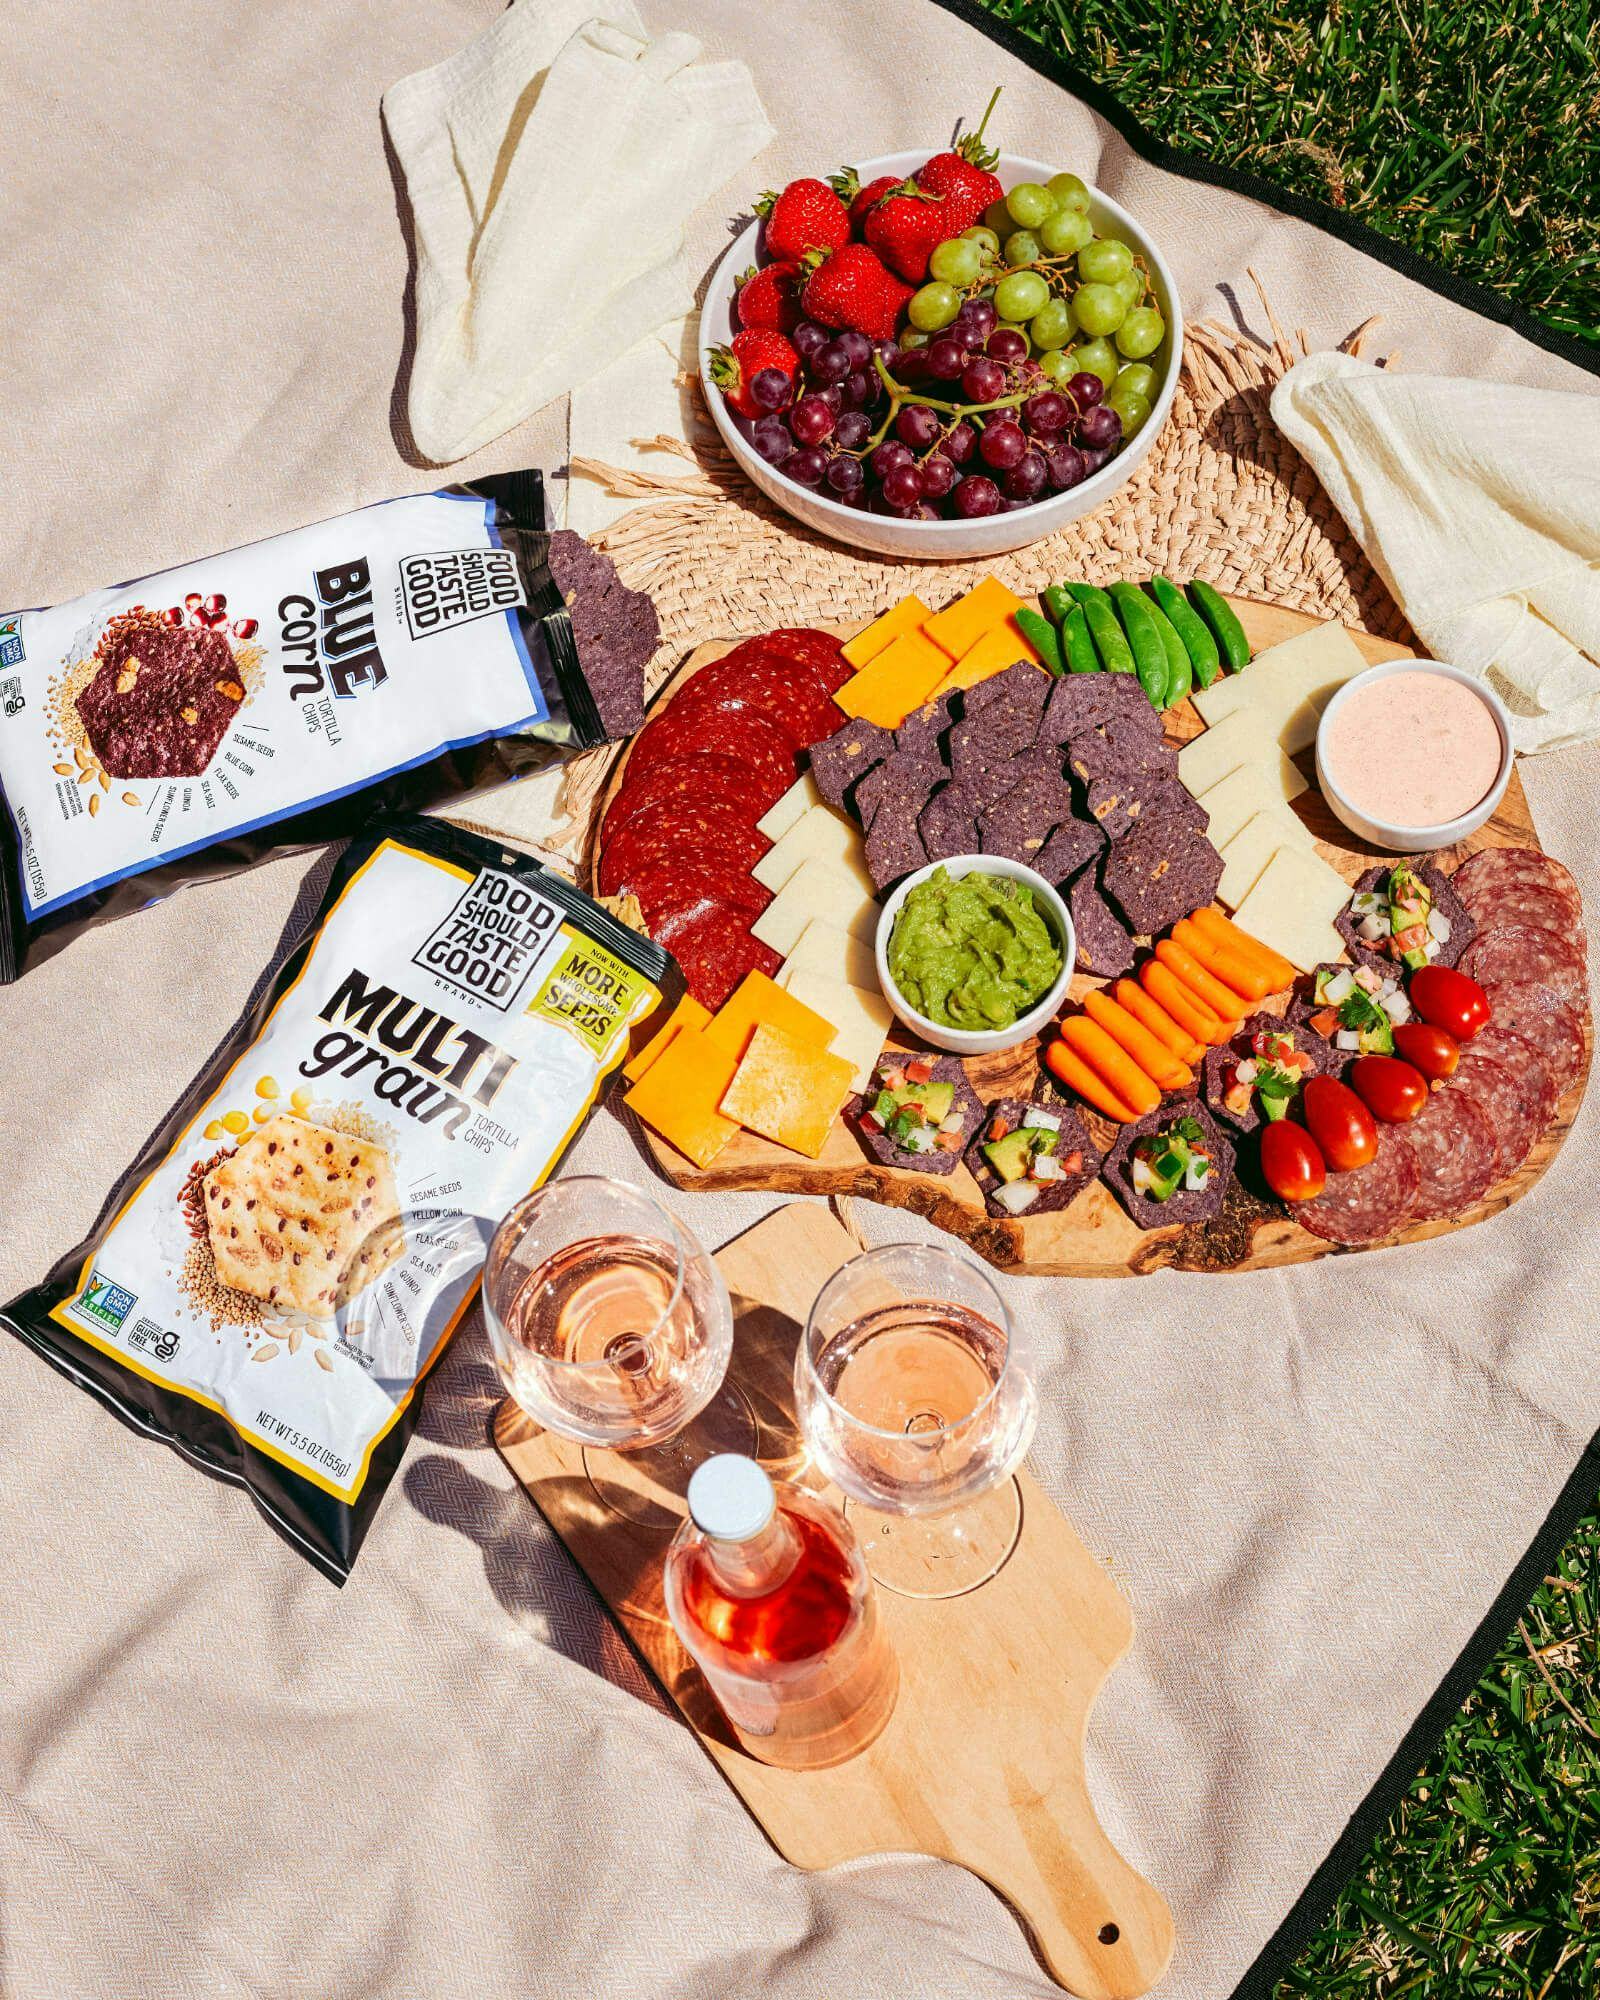 Bags of chips, a charceuterie board, and beverages laid out on a picnic mat.